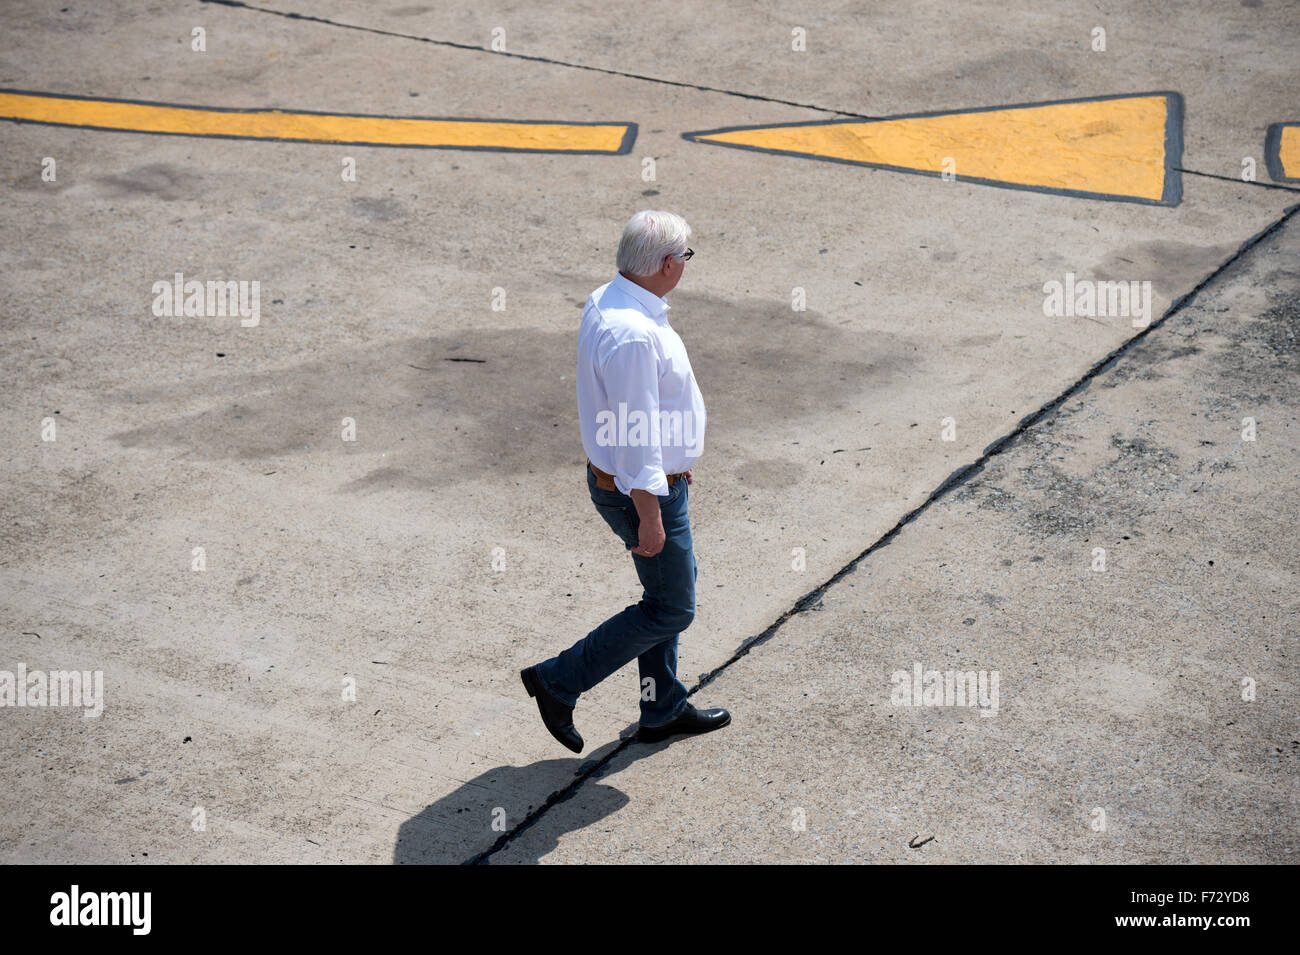 German Foreign Minister Frank-Walter Steinmeier (SPD) walks to his plane to travel on to Entebbe in Uganda, at the airport in Lusaka, Zambia, 21 November 2015. Steinmeier is visiting the four African states of Mozambique, Zambia, Uganda, and Tanzania with a cultural and economic delegation until Sunday, 22 November 2015. Photo: BERND VON JUTRCZENKA/dpa Stock Photo